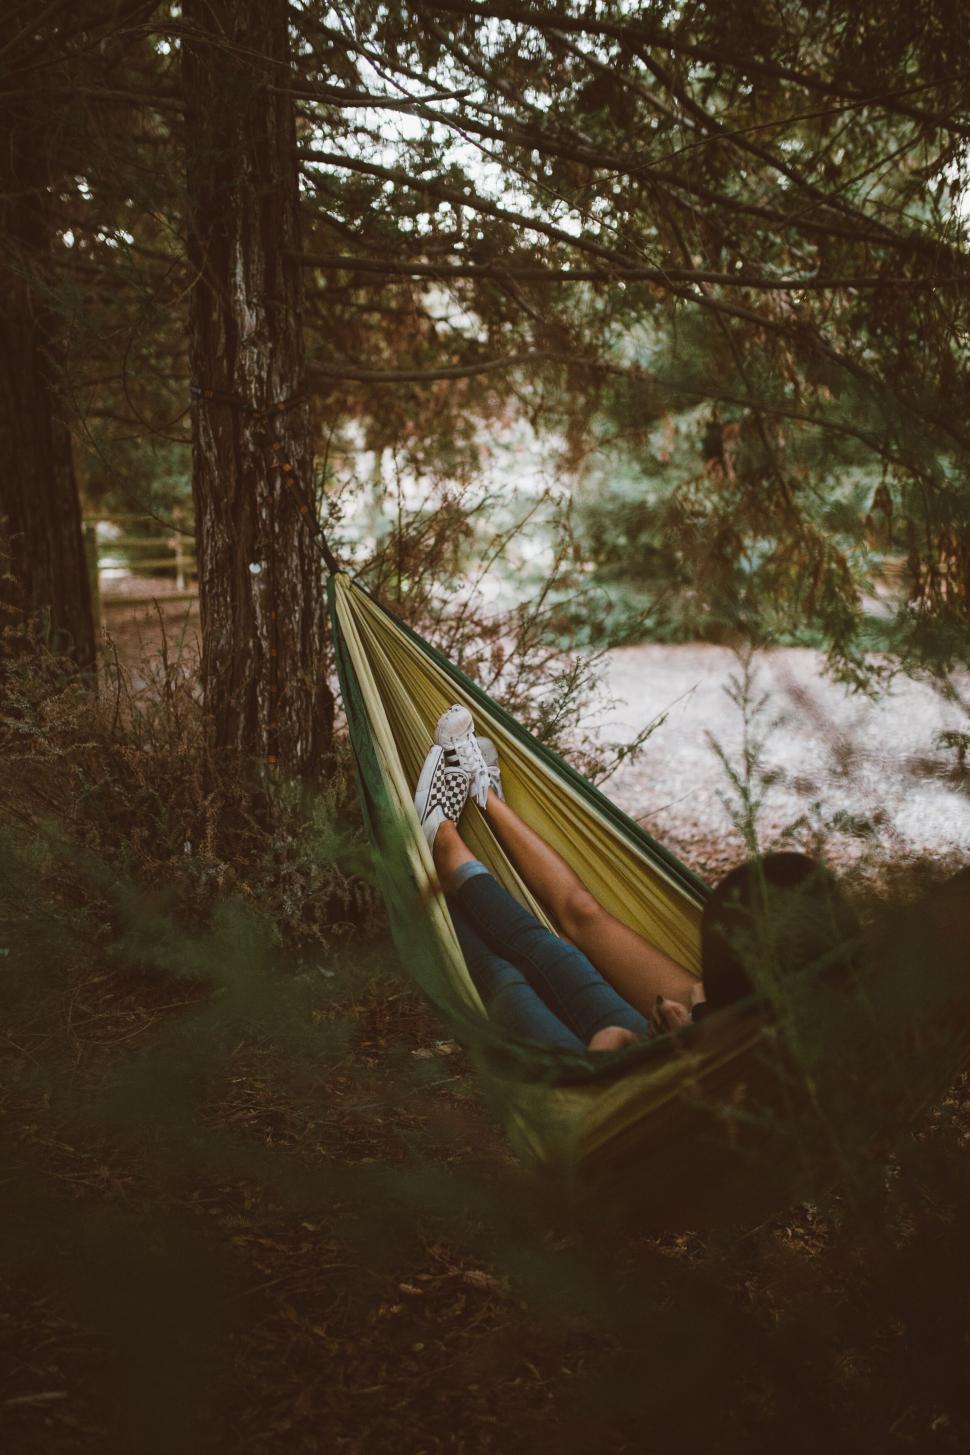 Free Image of Relaxing hammock in a serene forest setting 